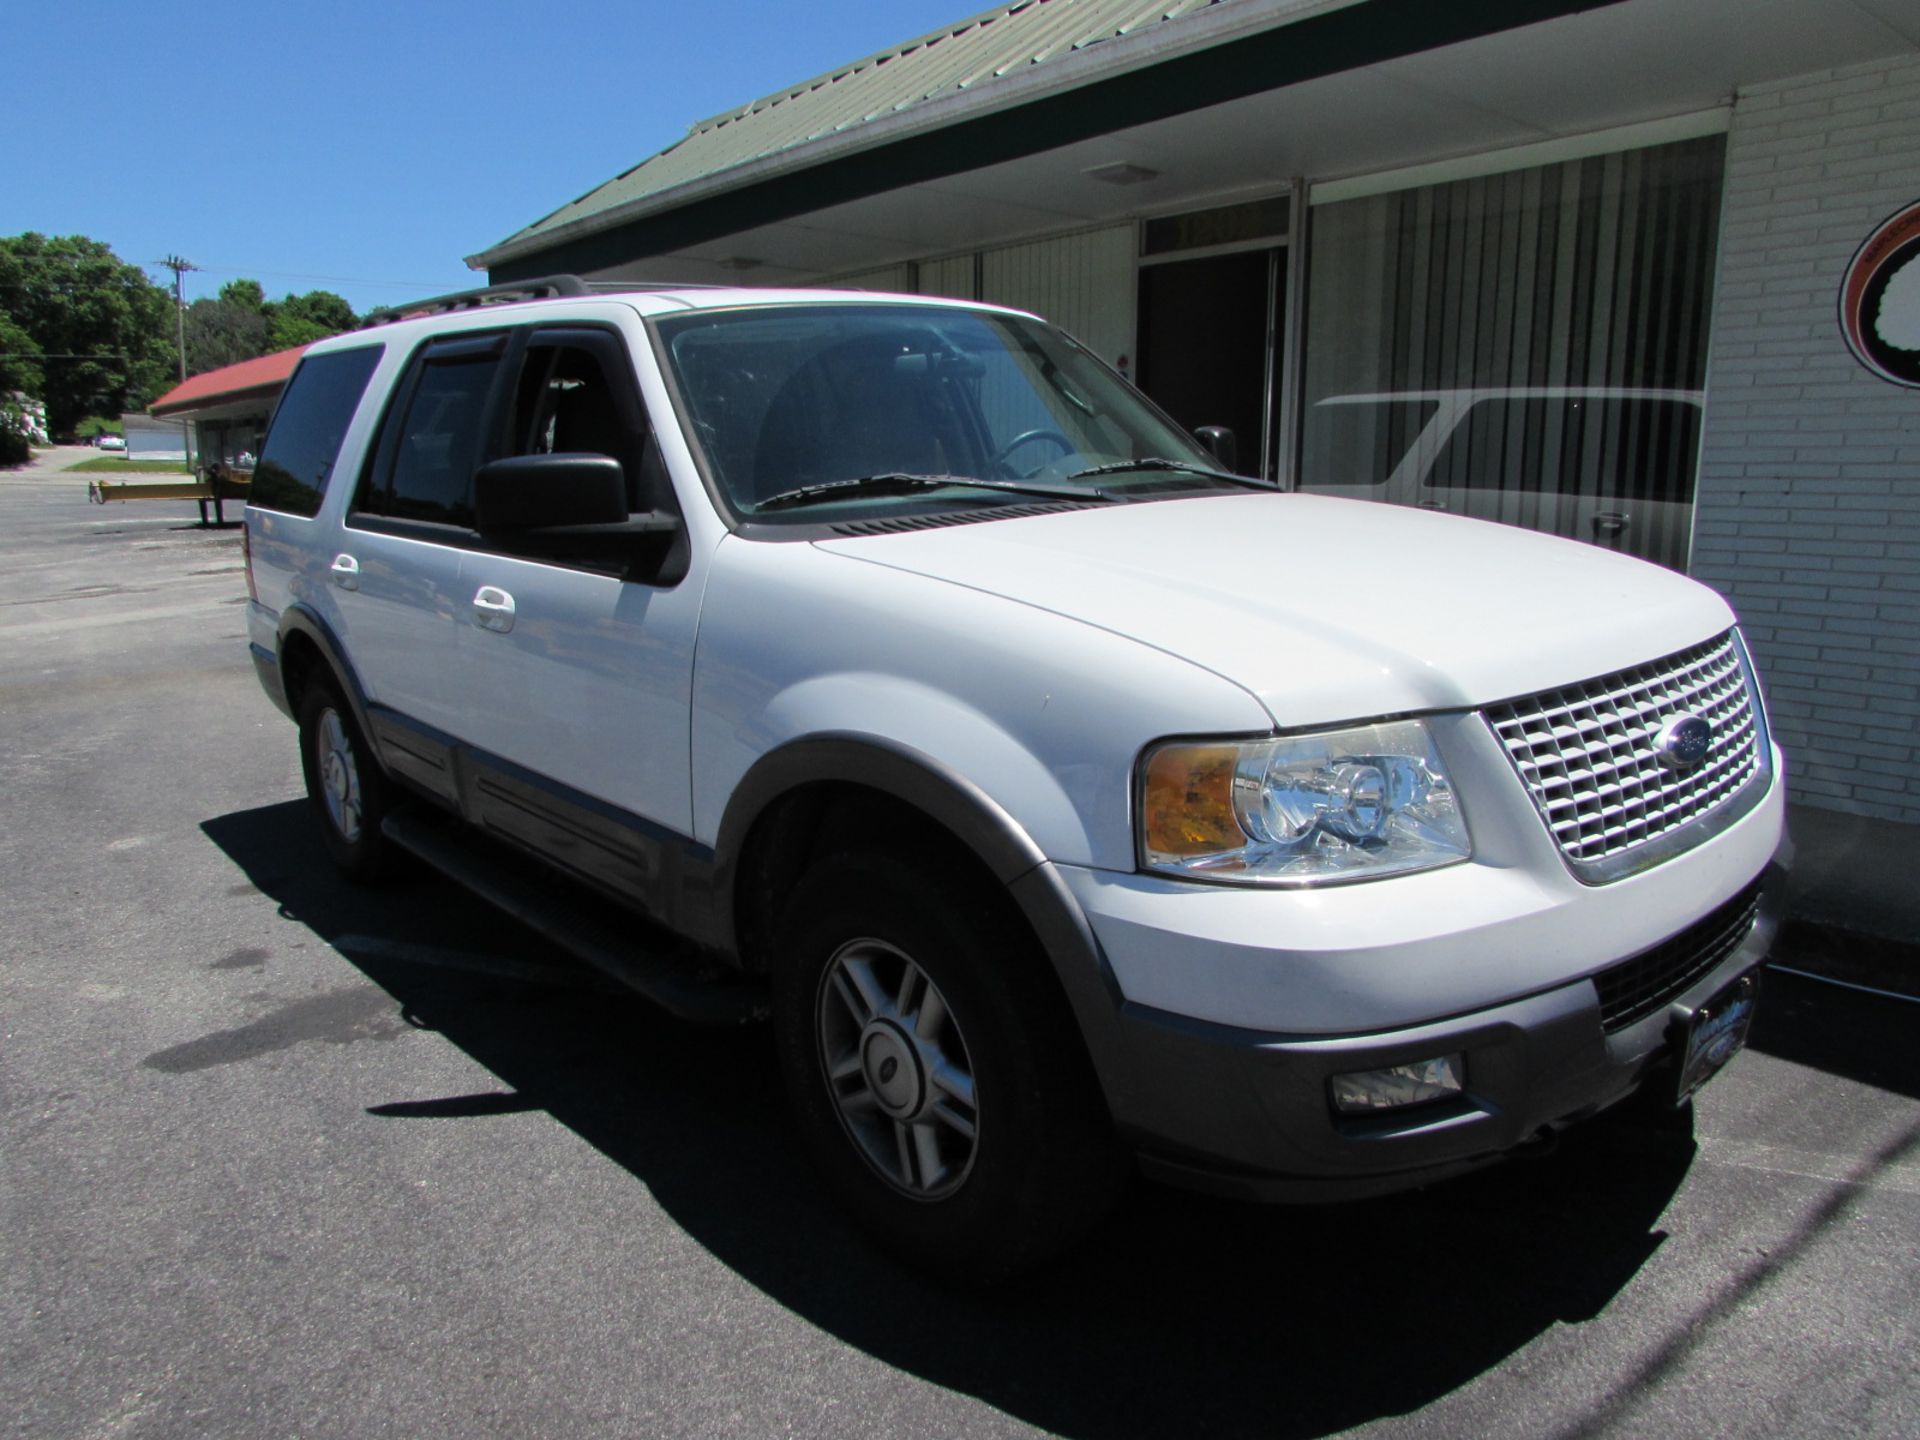 2006 Ford Expedition, V-8 Automatic, Leather, Power Windows, Power Door, 2-WD ODO 70,341, Vin - Image 2 of 5